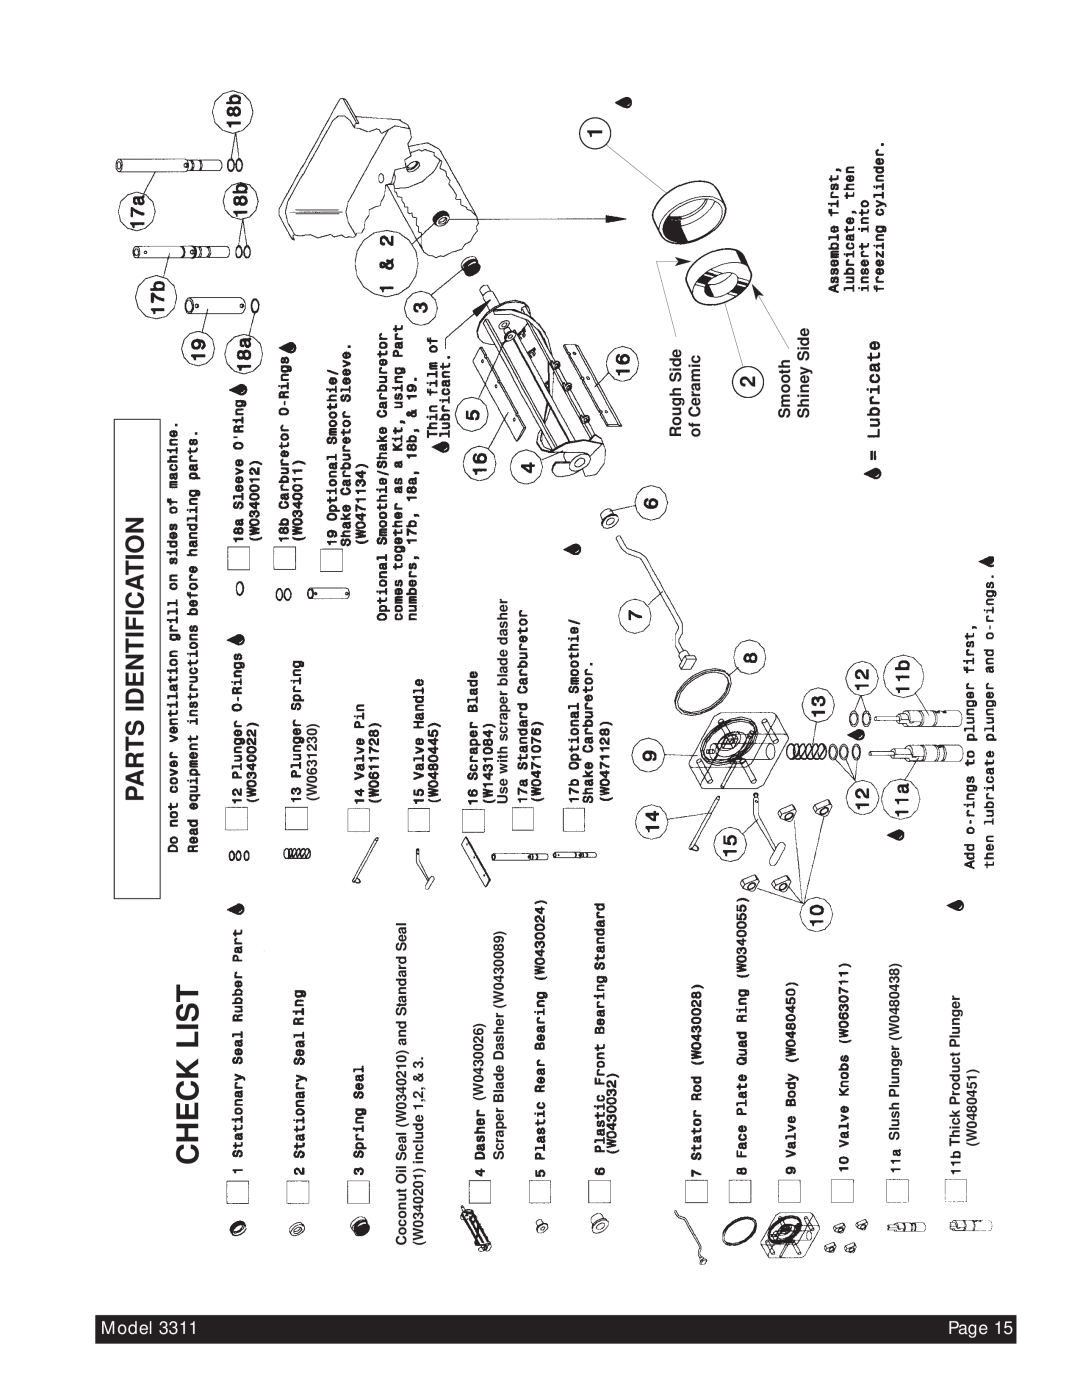 Beverage-Air 3311 Parts Identification, Check List, Model, Rough Side of Ceramic, Smooth Shiney Side, W0480451, Page15 